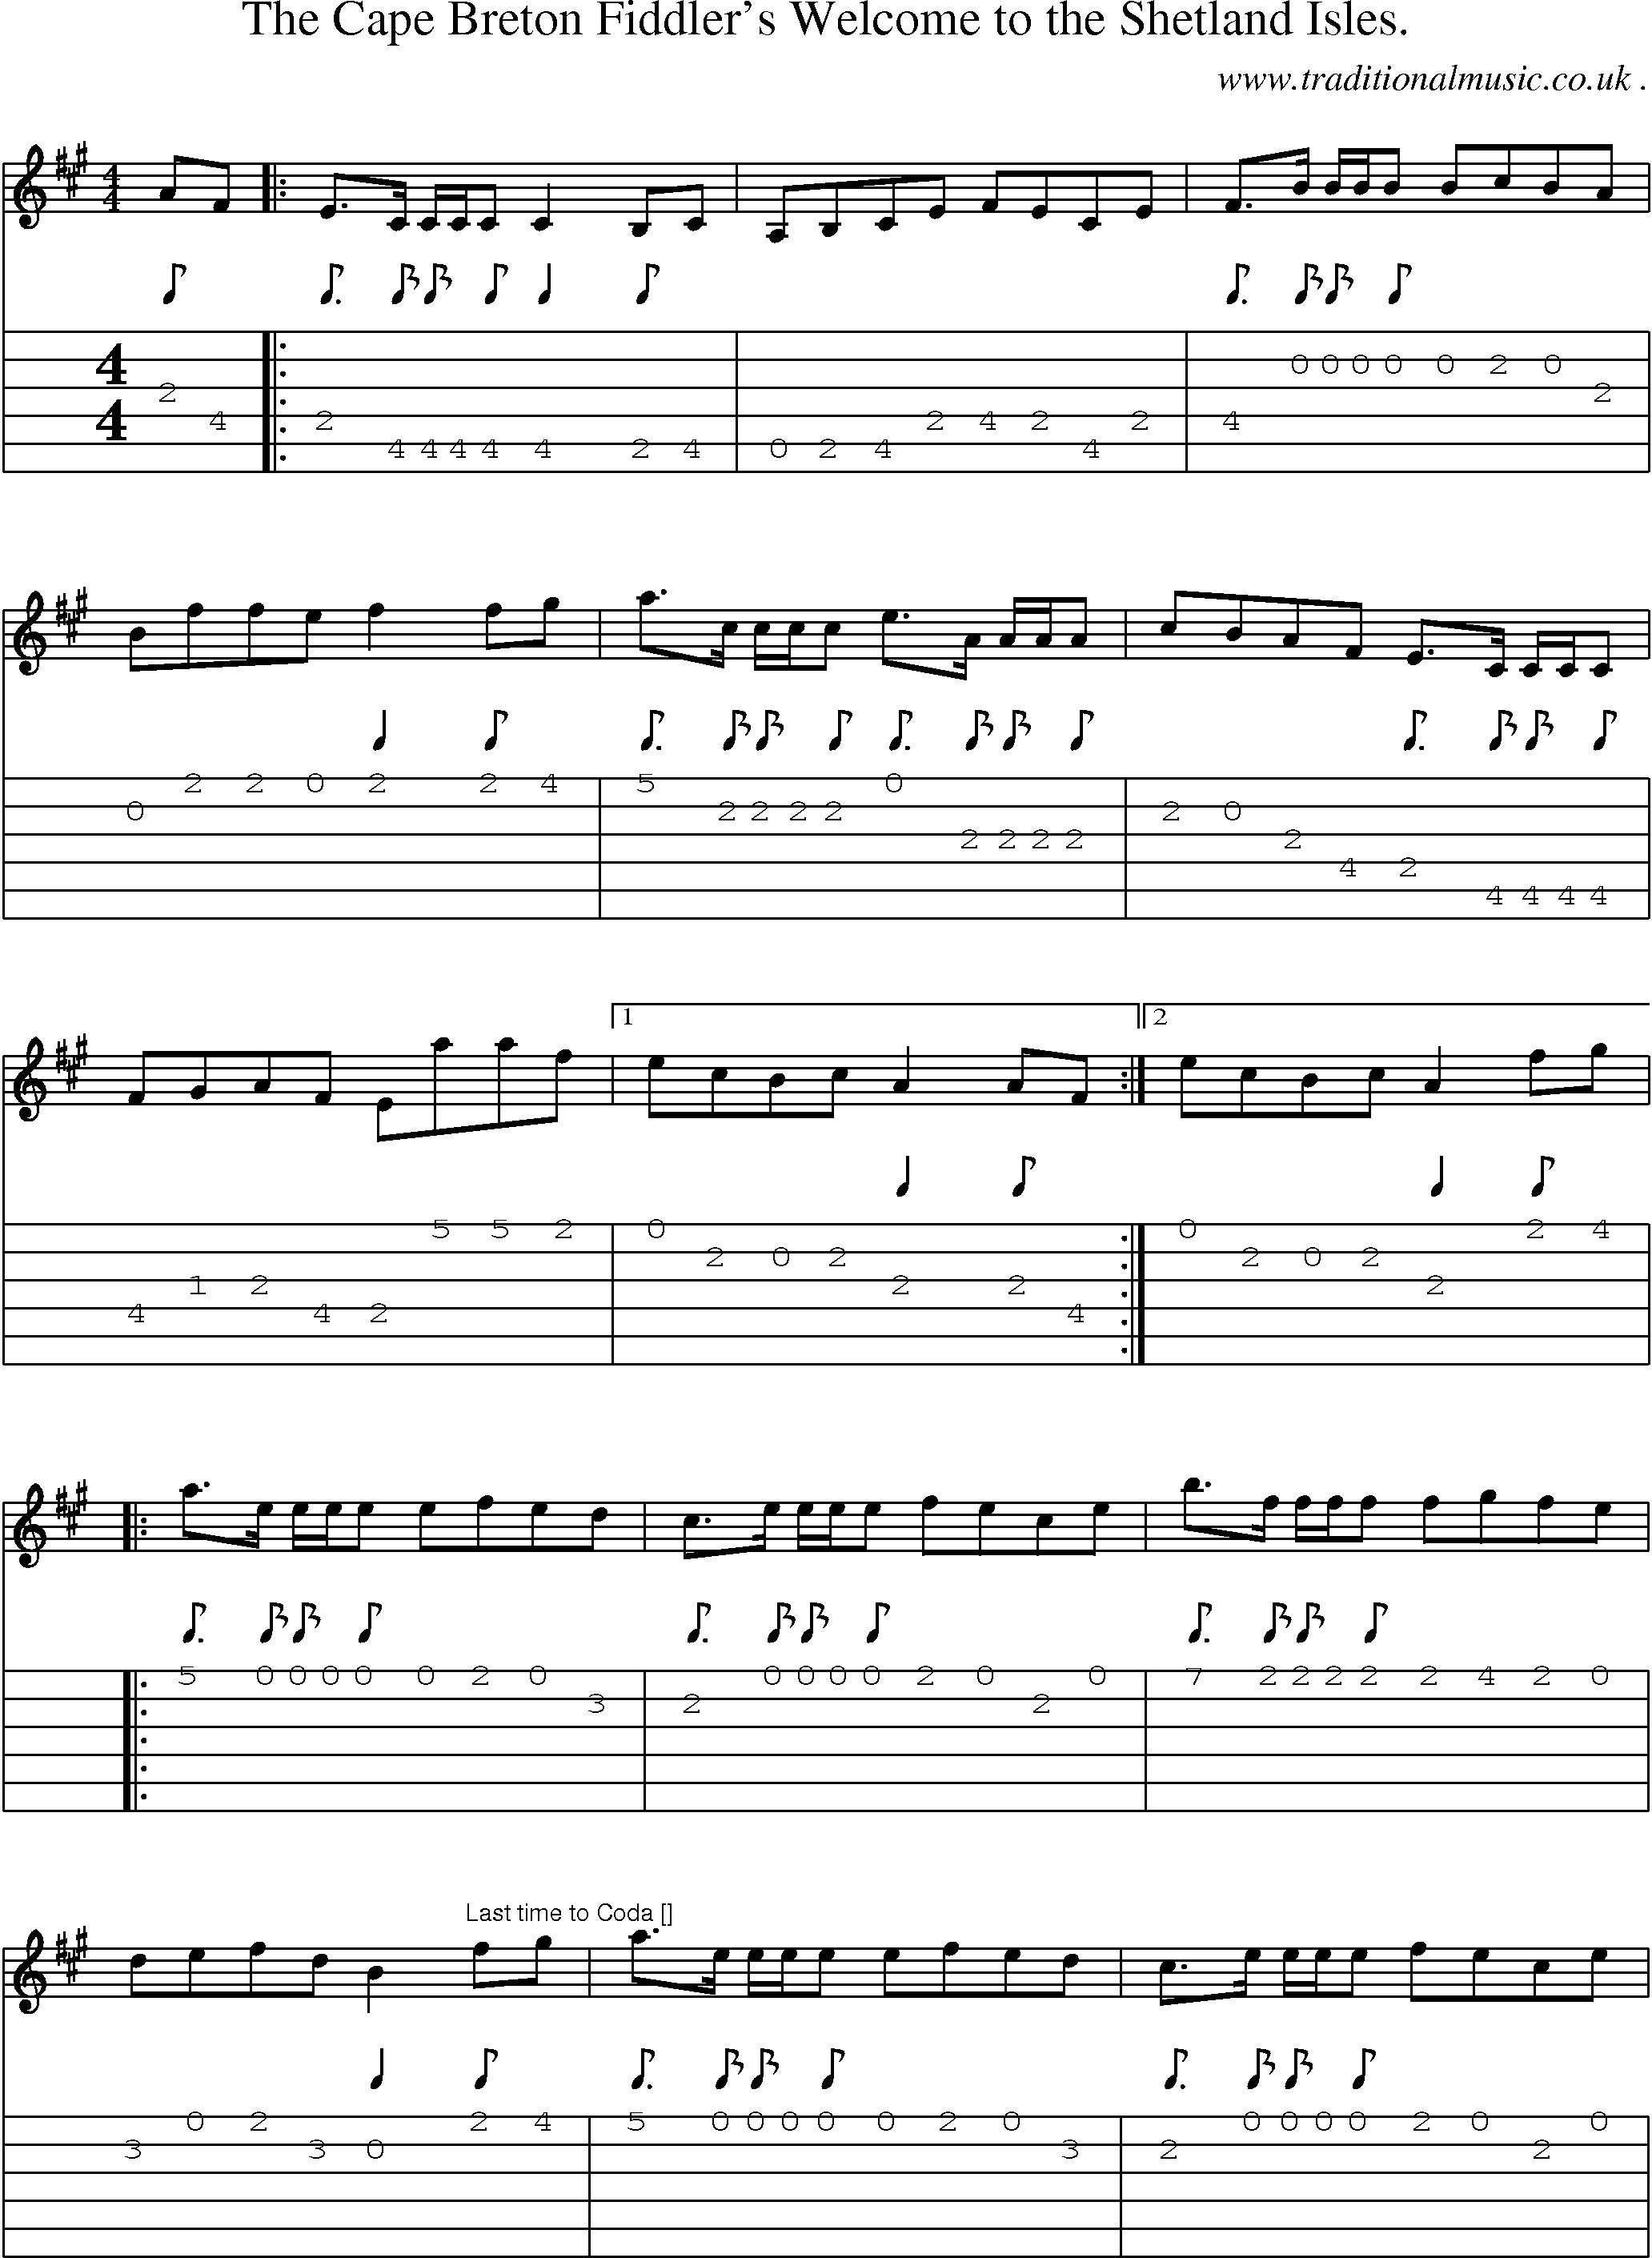 Sheet-Music and Guitar Tabs for The Cape Breton Fiddlers Welcome To The Shetland Isles